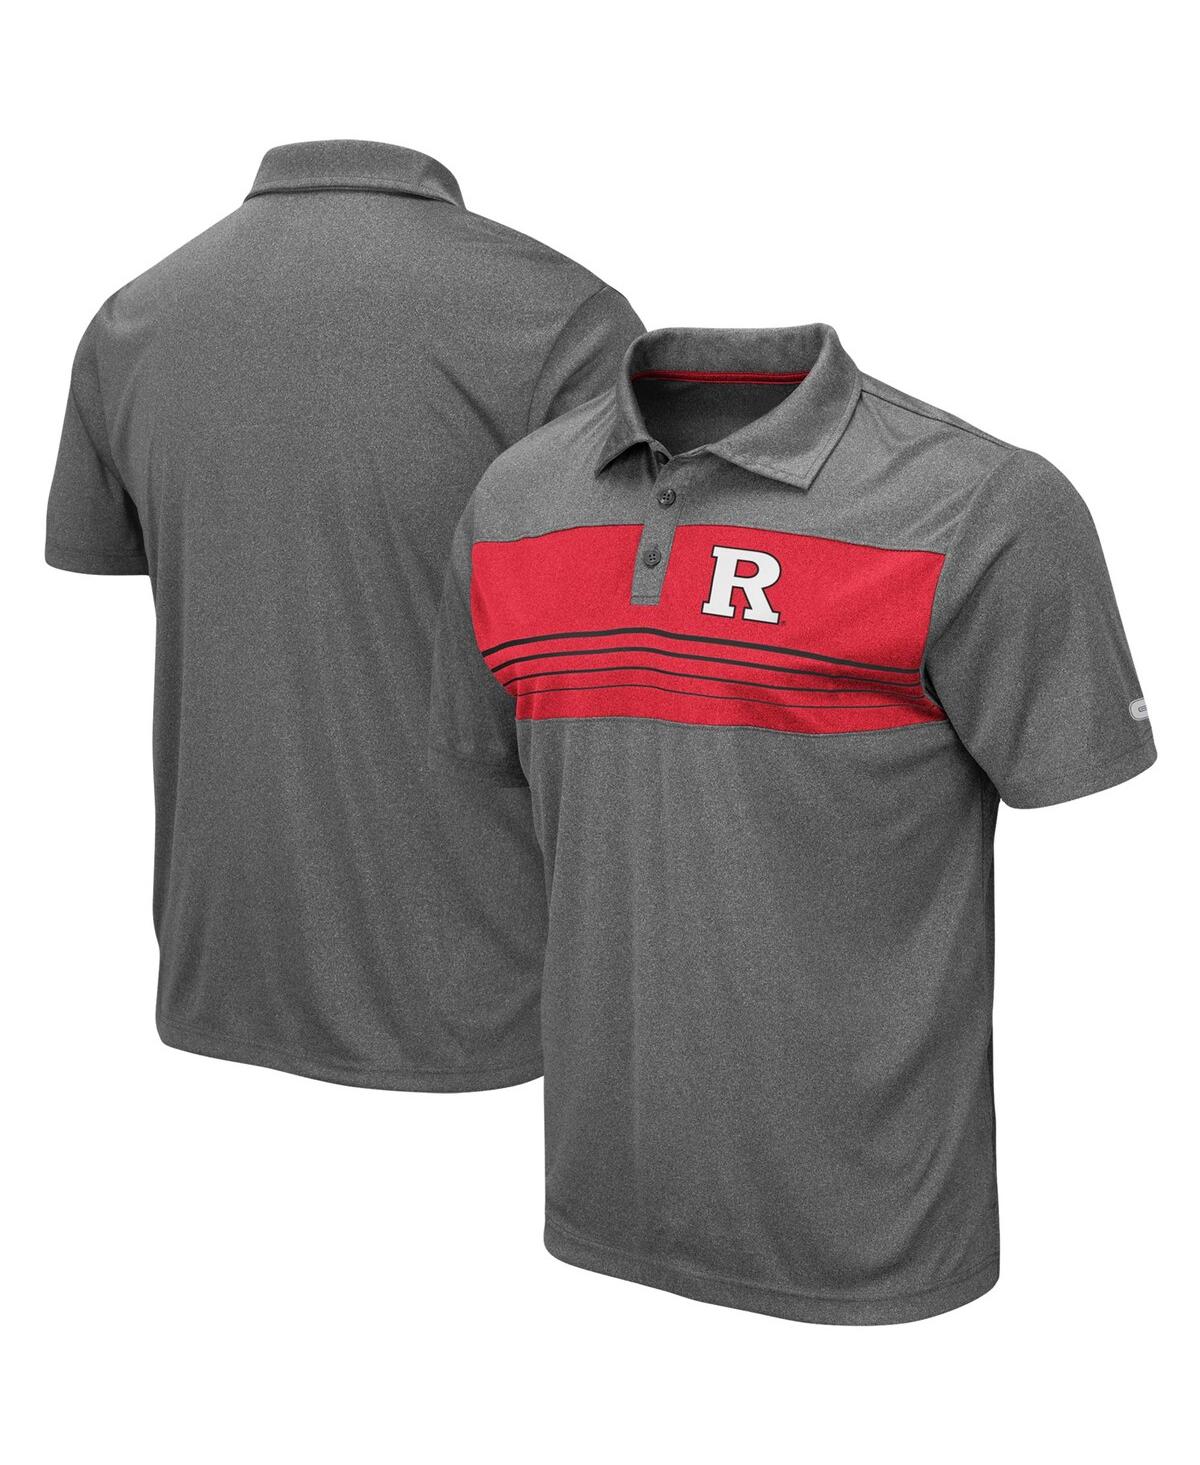 Shop Colosseum Men's  Heathered Charcoal Rutgers Scarlet Knights Smithers Polo Shirt